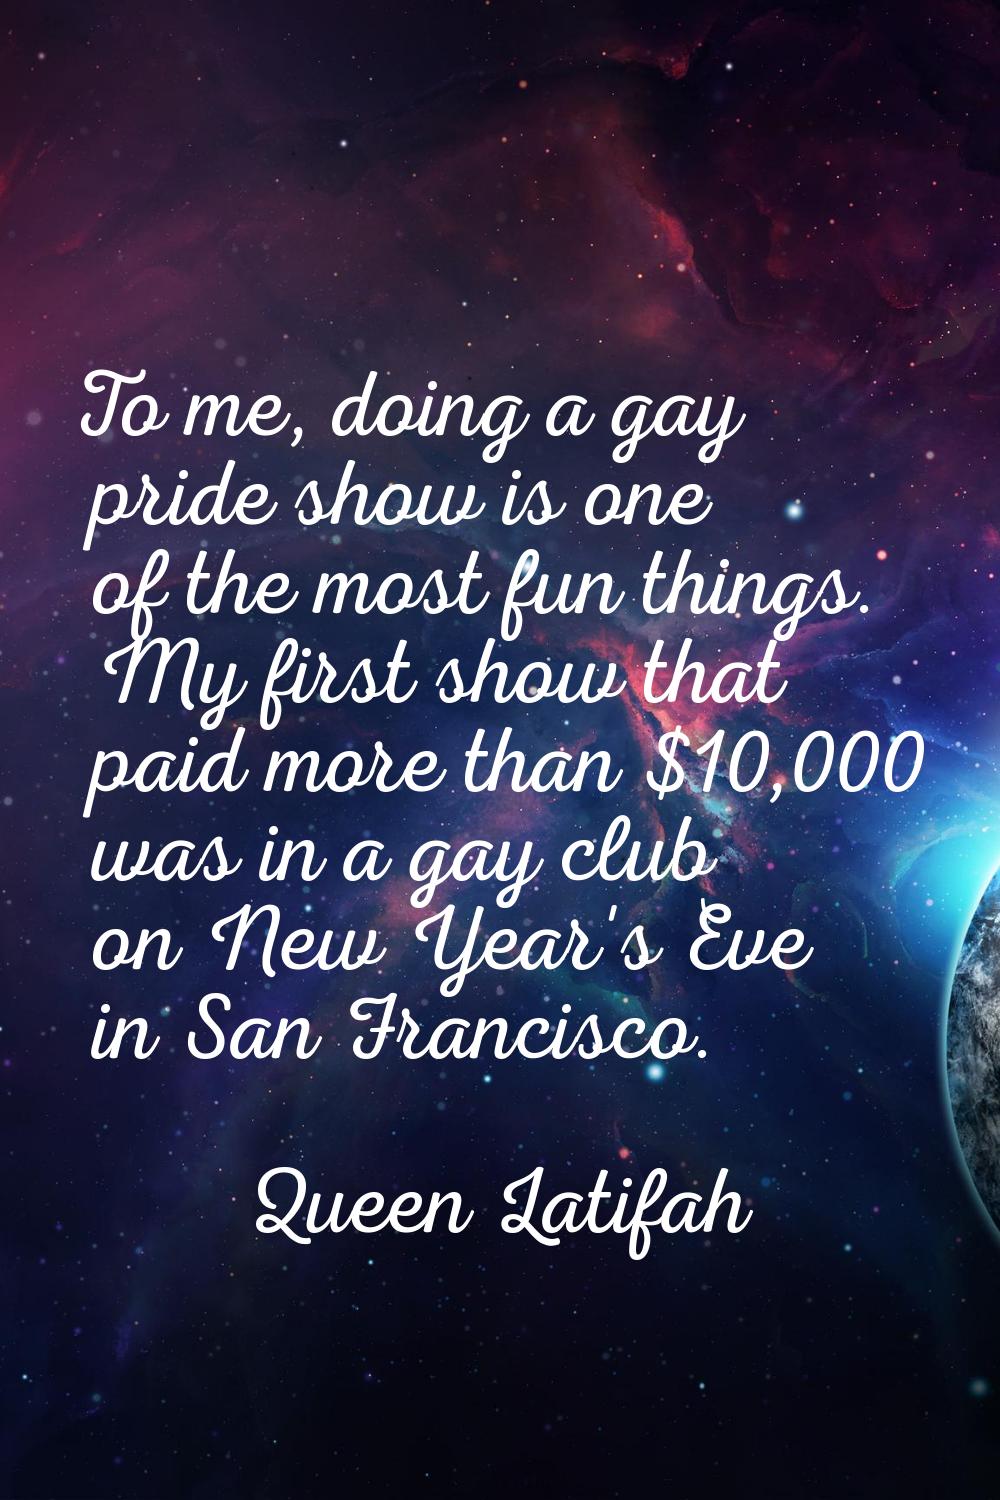 To me, doing a gay pride show is one of the most fun things. My first show that paid more than $10,